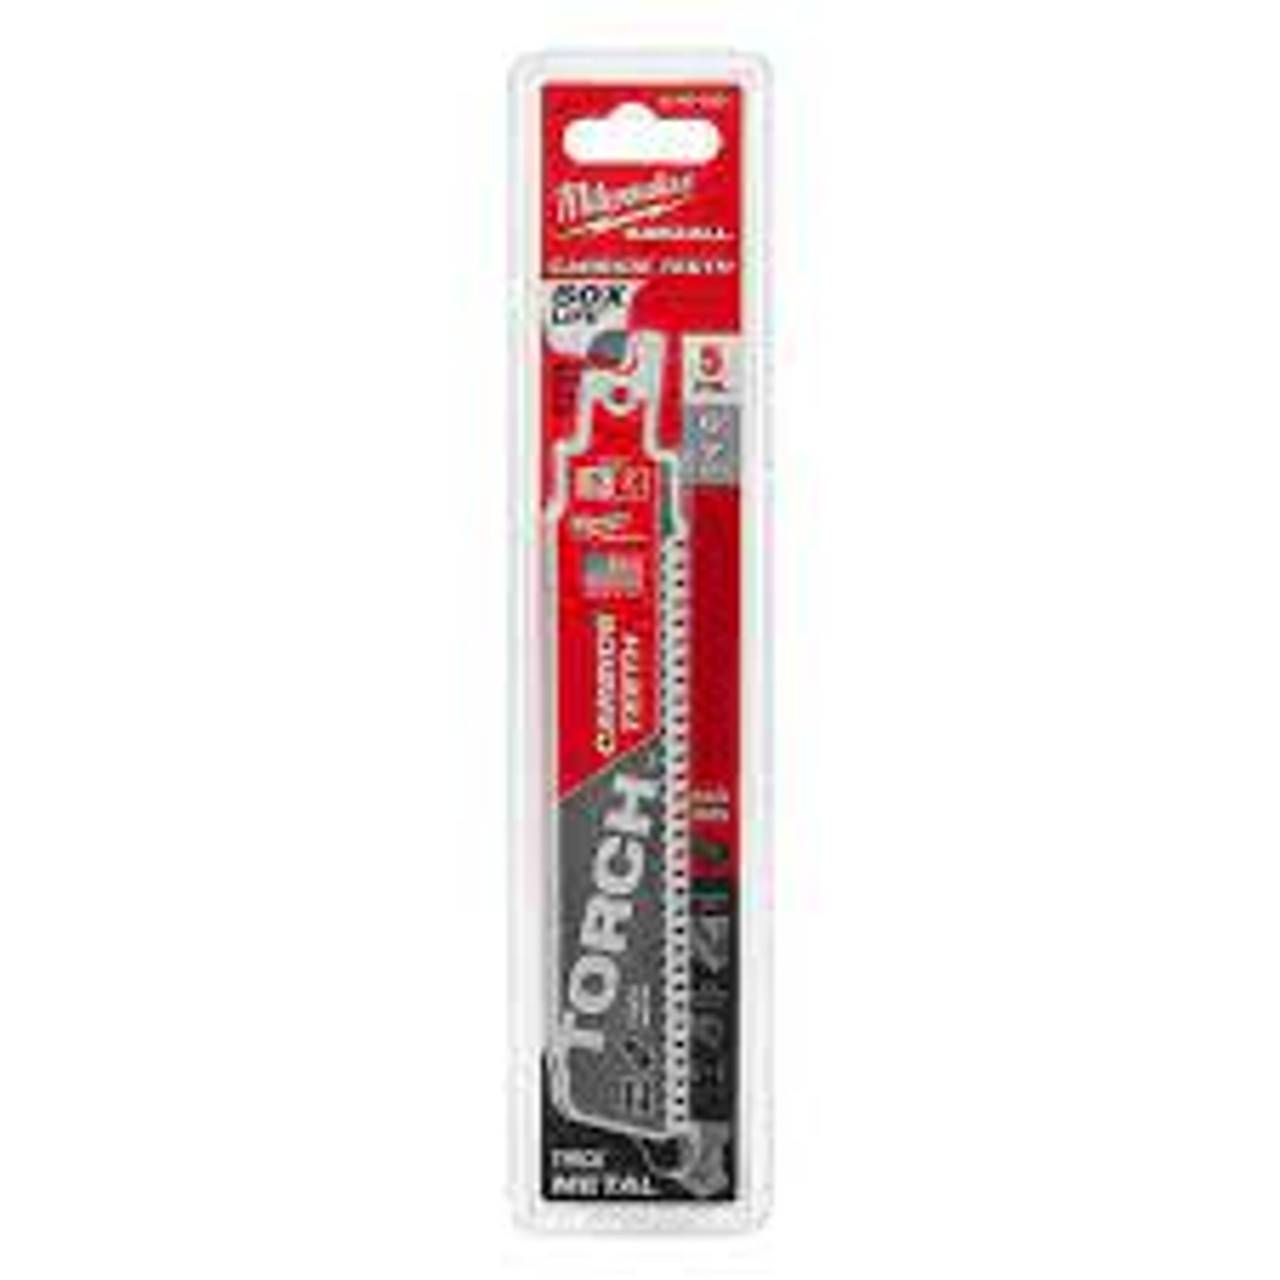 Scie Torch Sawzall, Carbure, 7 Dents/pouce, 6x1 48-00-5501